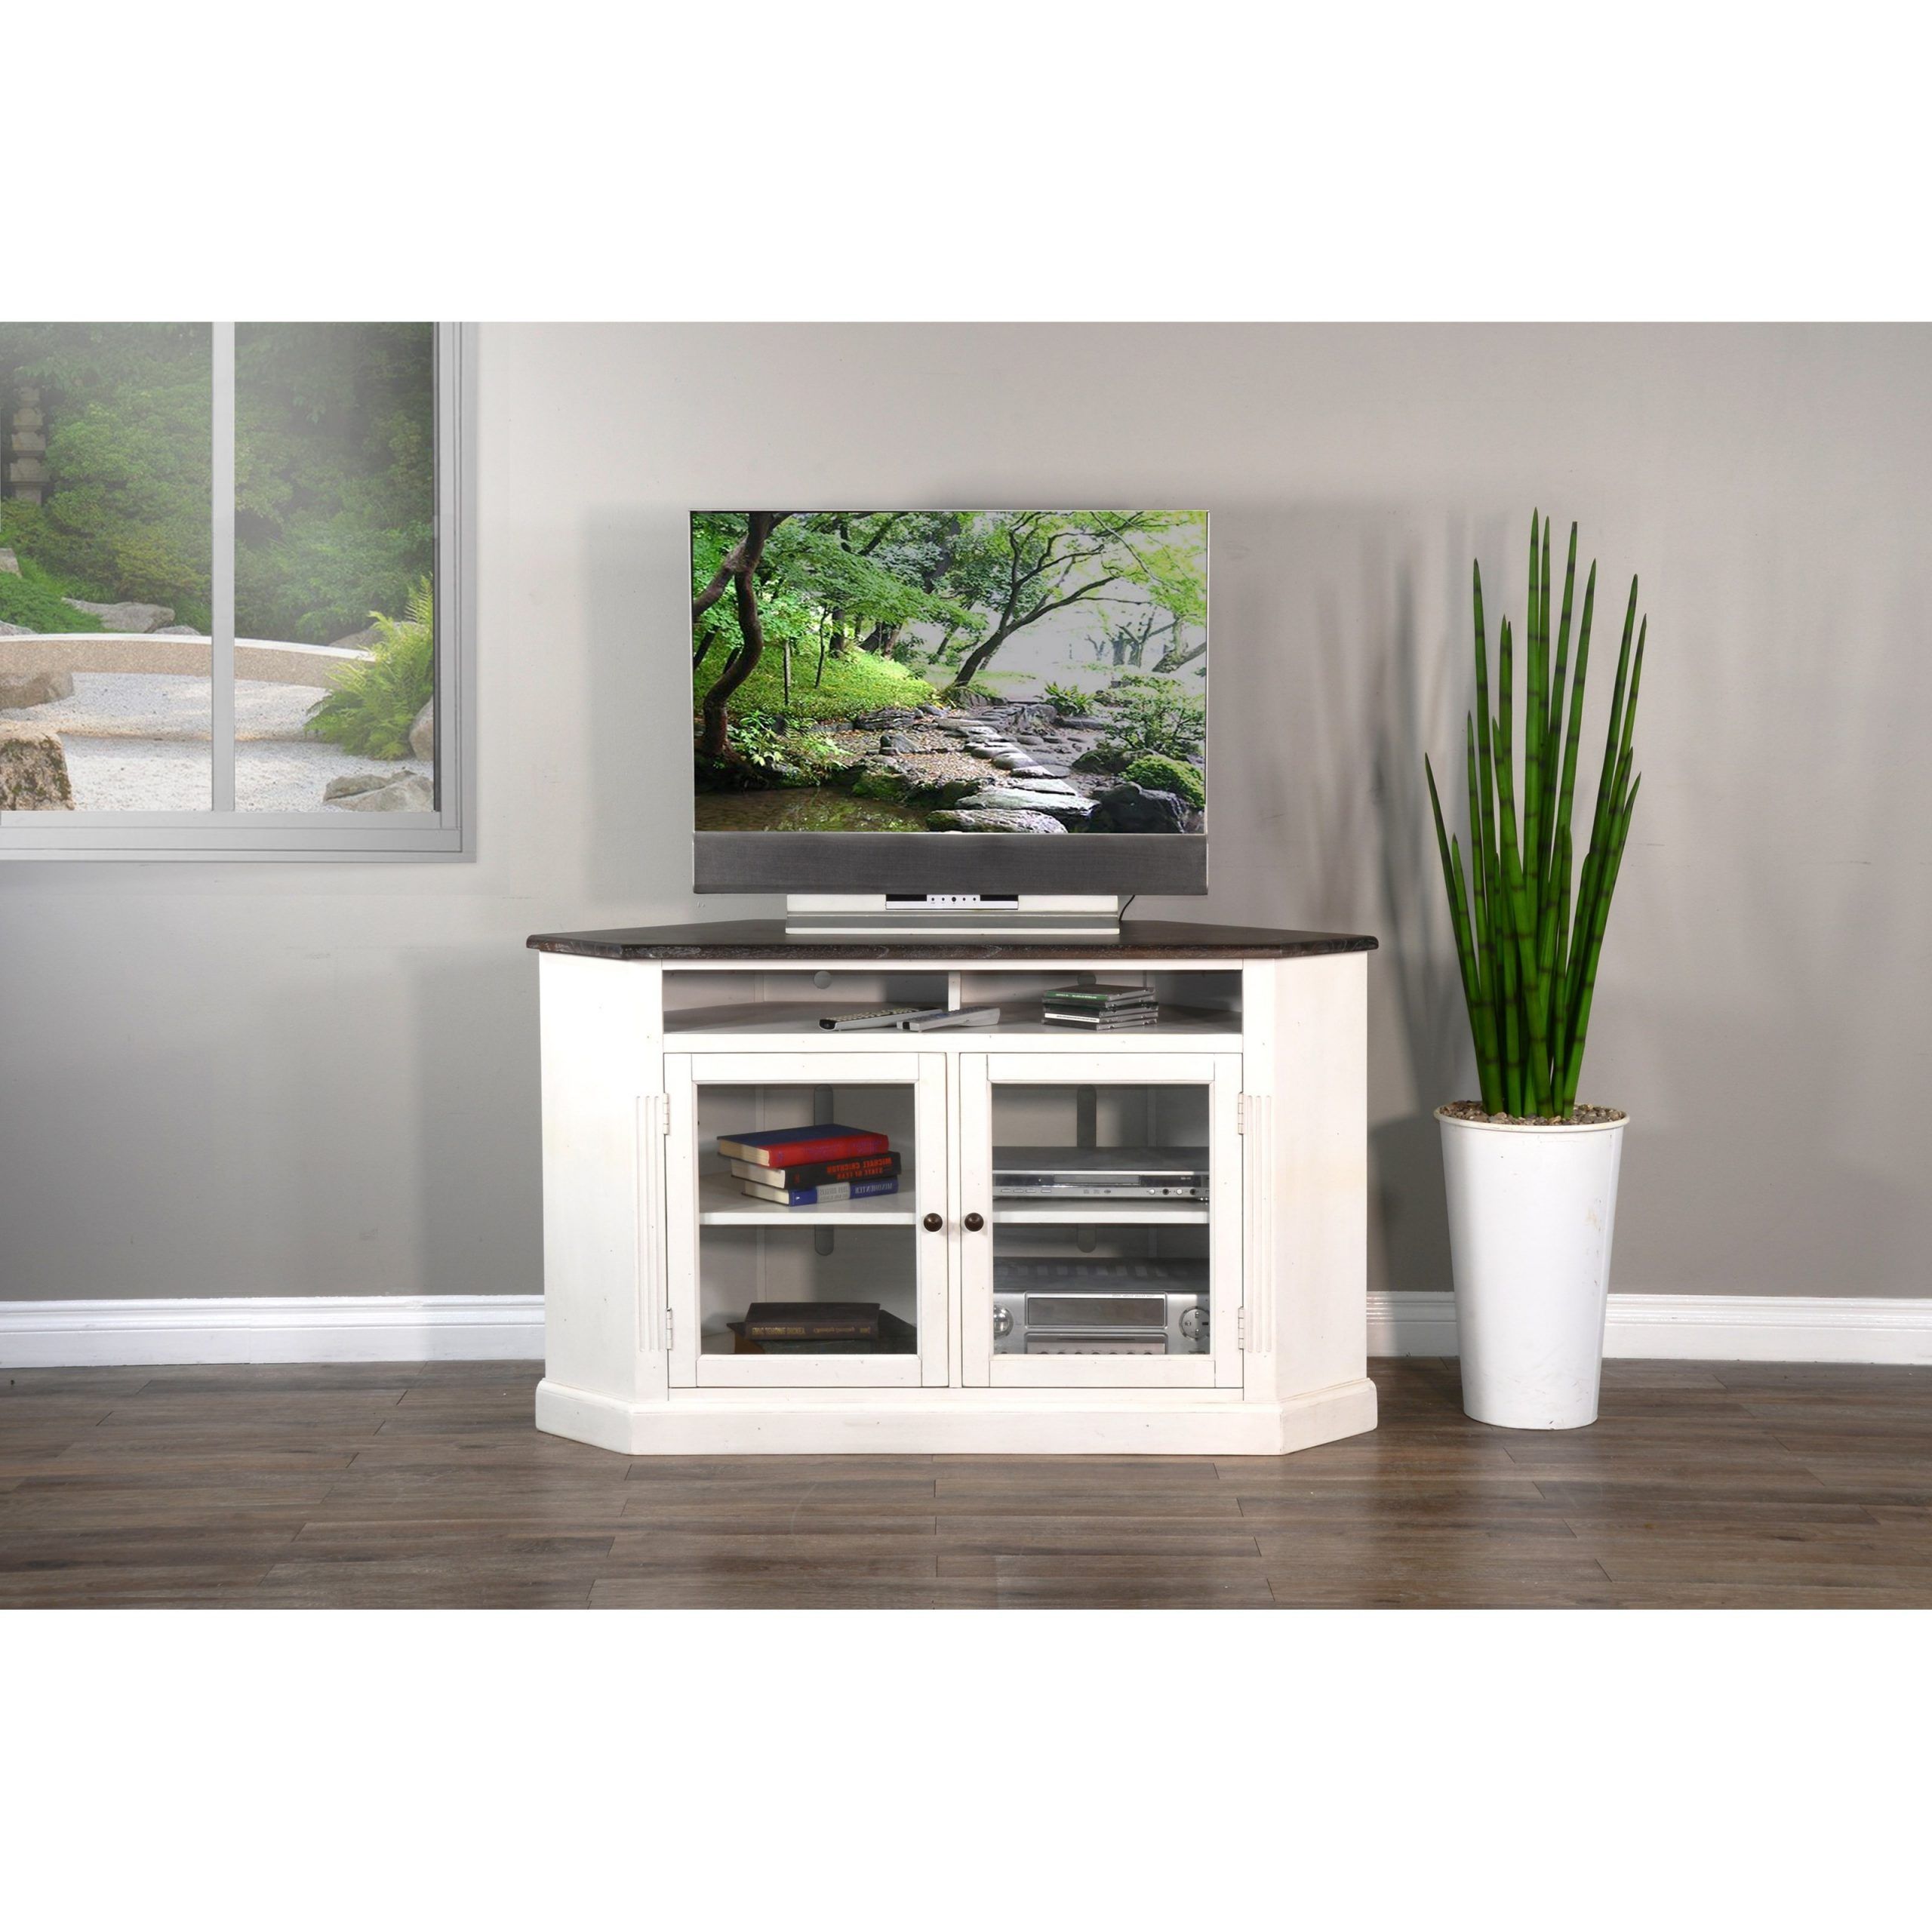 Sunny Designs 3635 Corner Tv Stand With Glass Doors Inside Modern 2 Glass Door Corner Tv Stands (Gallery 13 of 20)